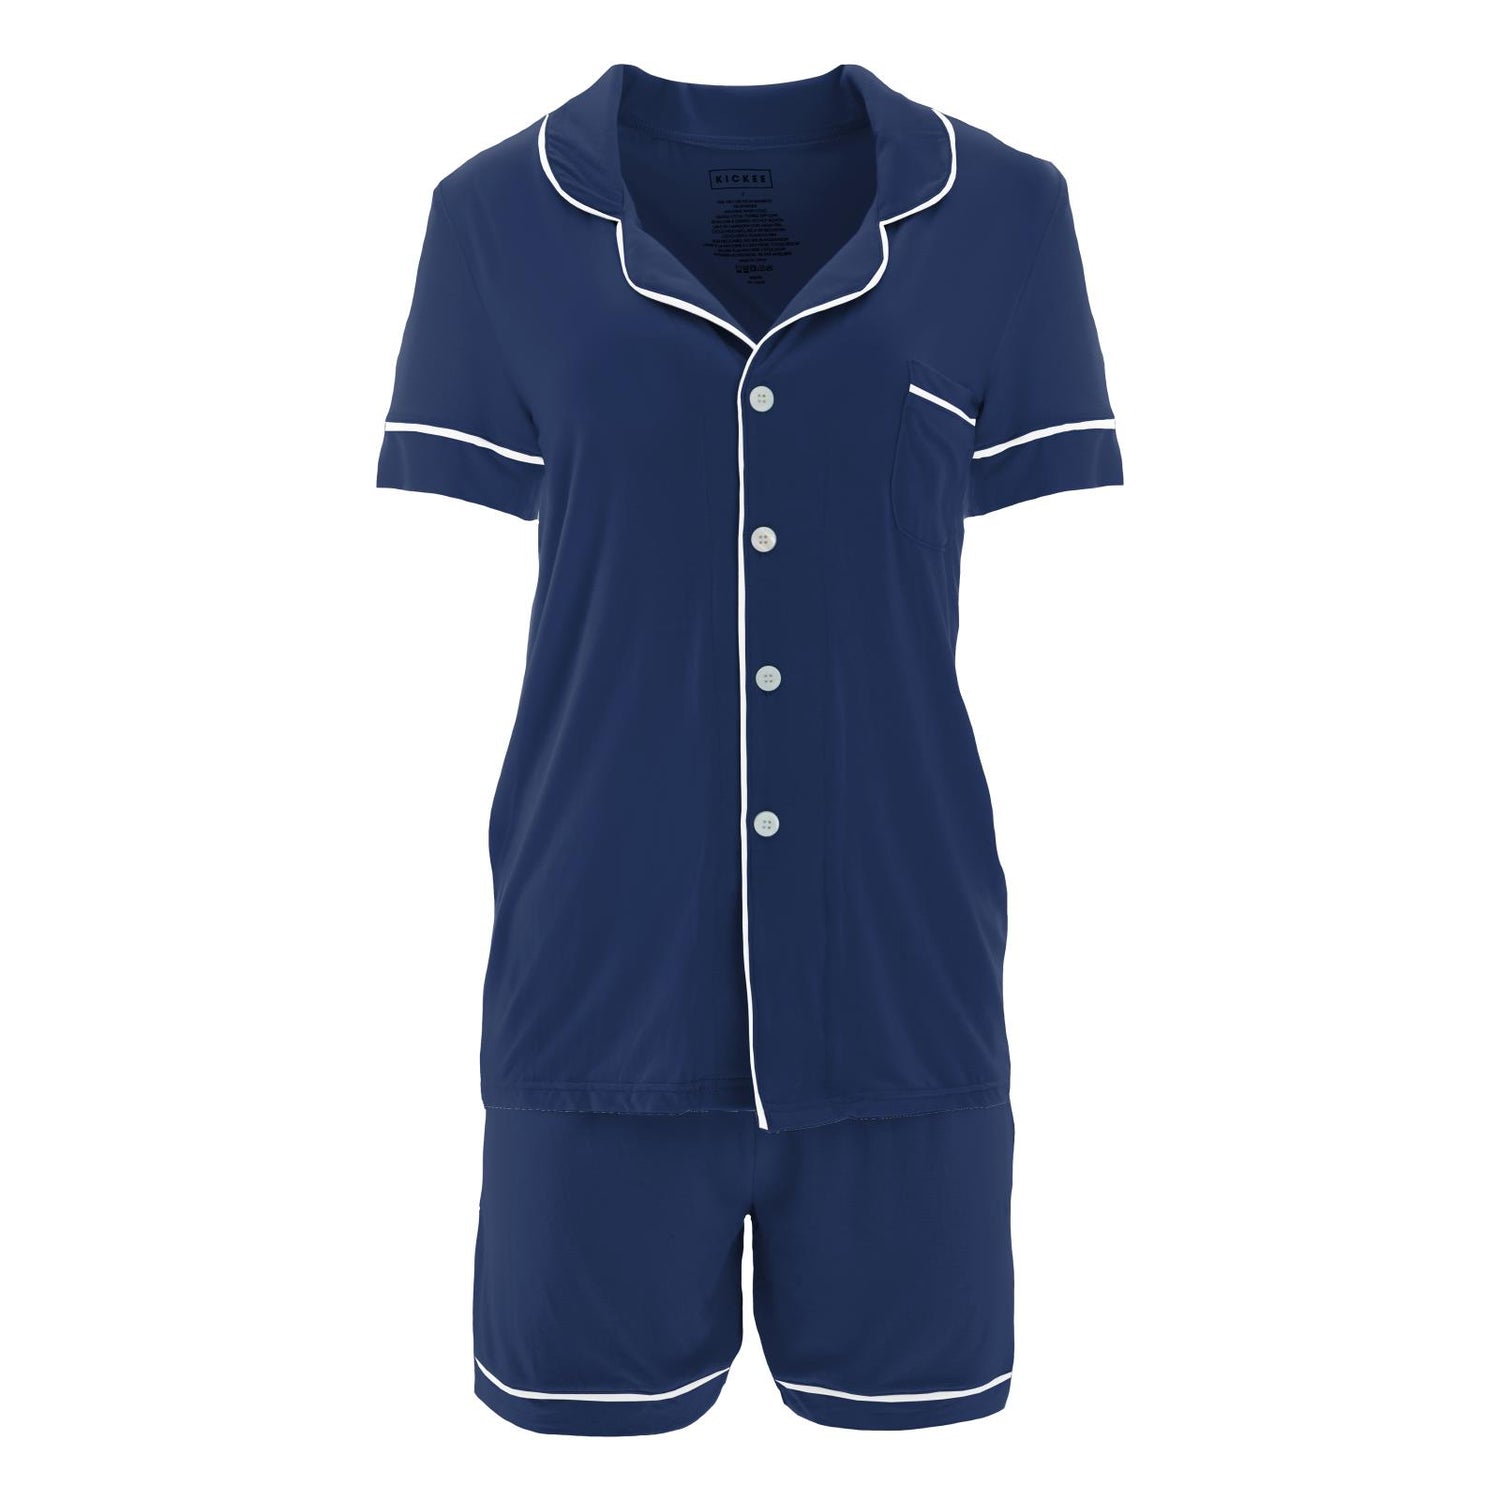 Women's Short Sleeve Collared Pajama Set with Shorts in Flag Blue with Natural